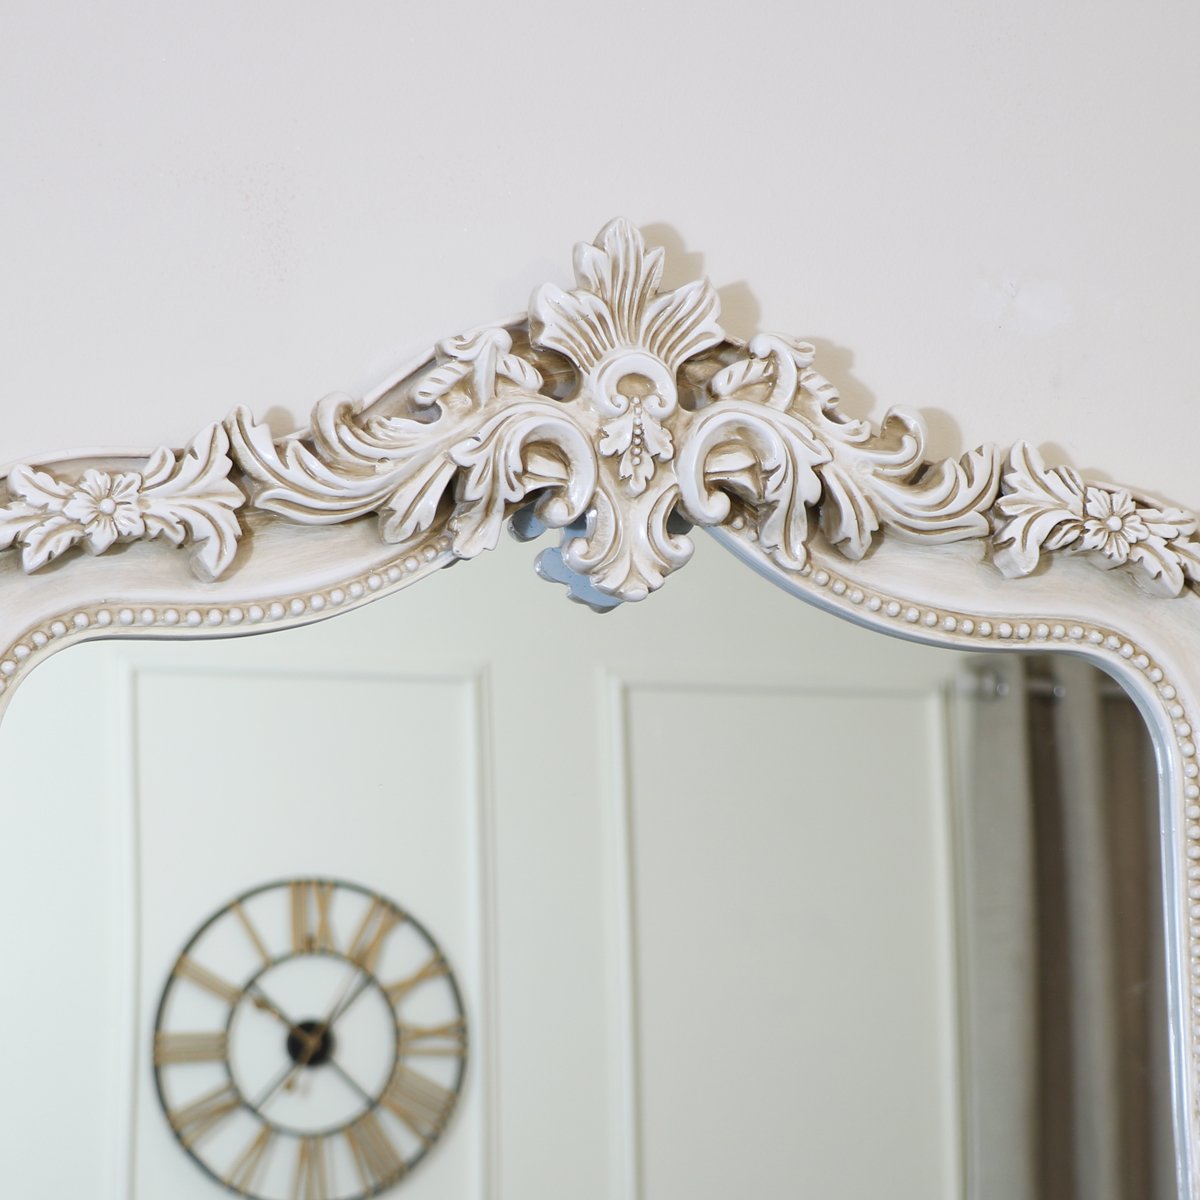 Ornate Arched Antiqued Ivory Wall Mirror 100 cm x 80cm 